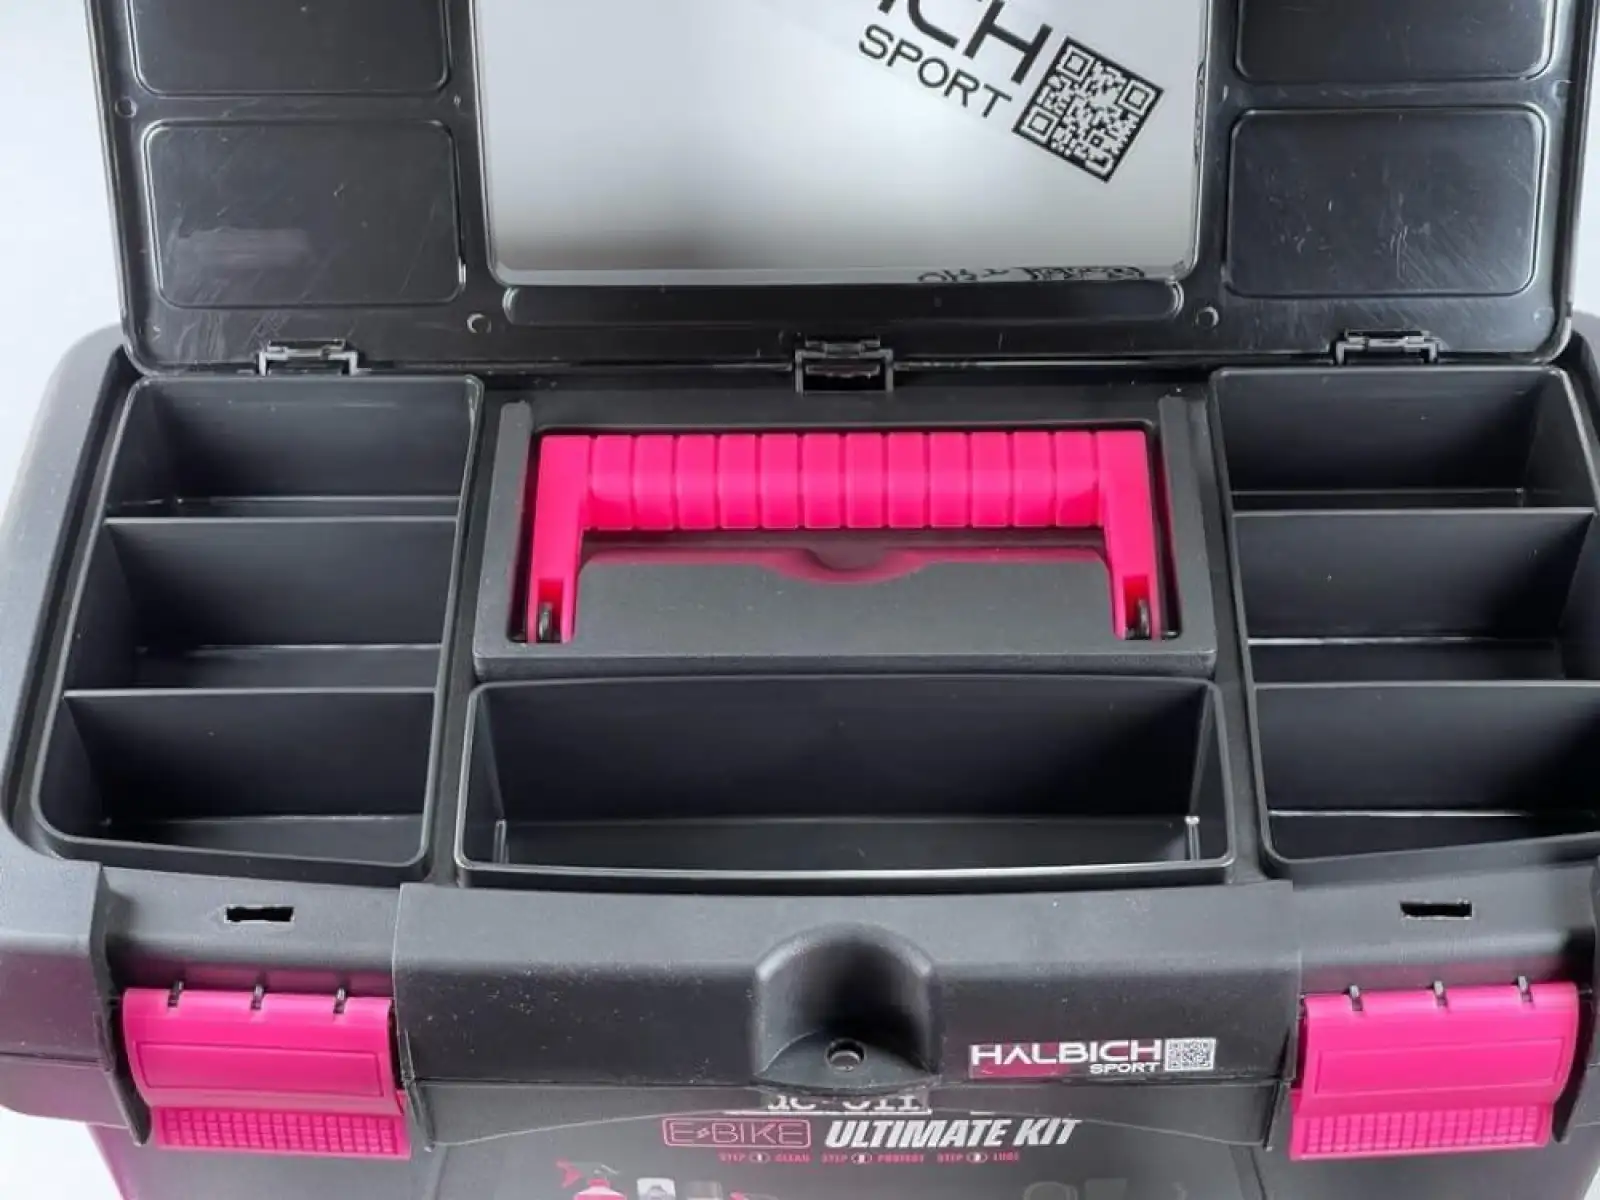 Muc-Off E-bike Ultimate Clean And Protect Lube Kit